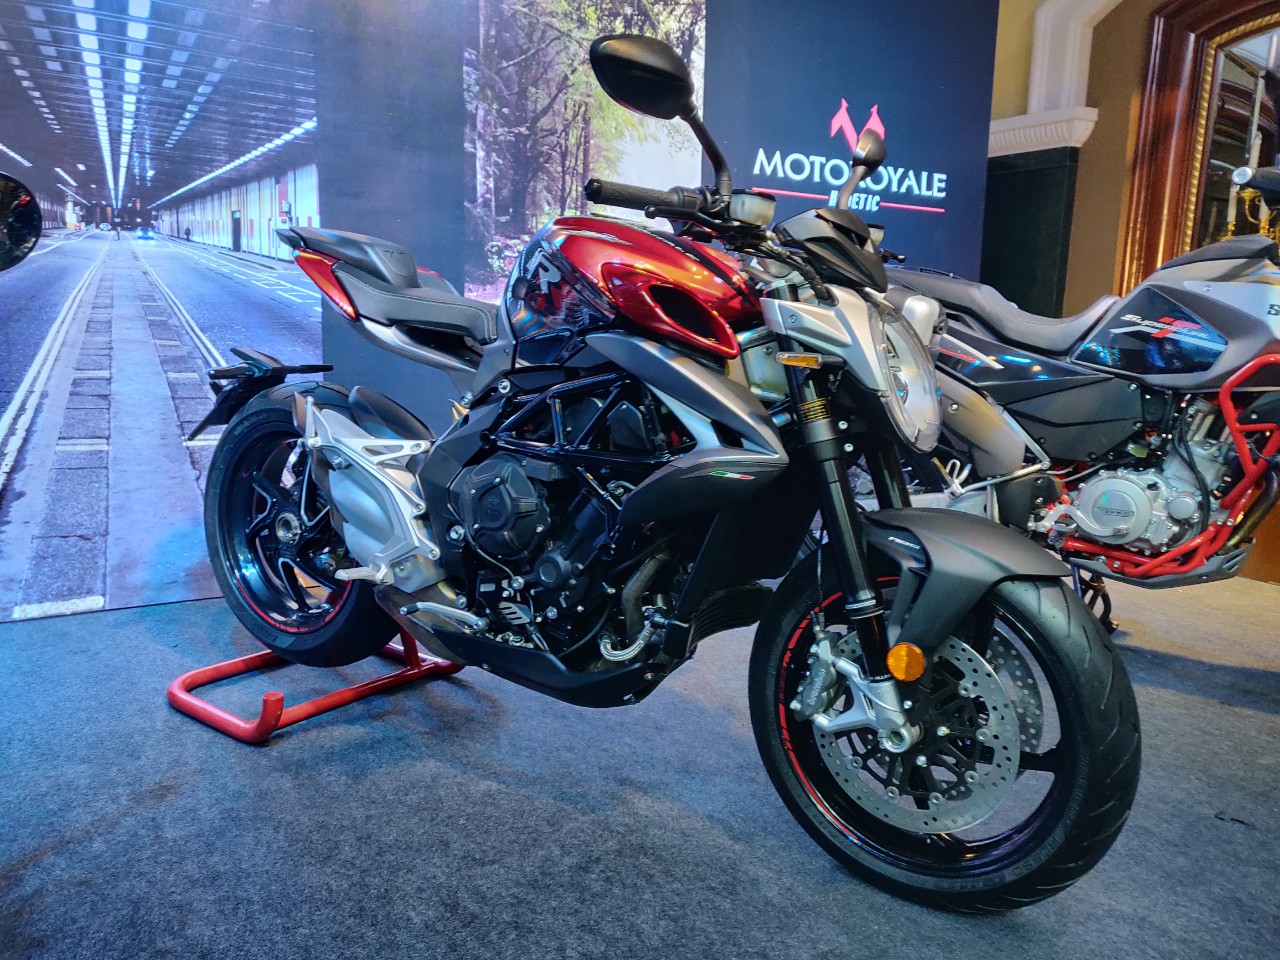 MV Agusta cruiser bike to be launched in the next 2 years - Report